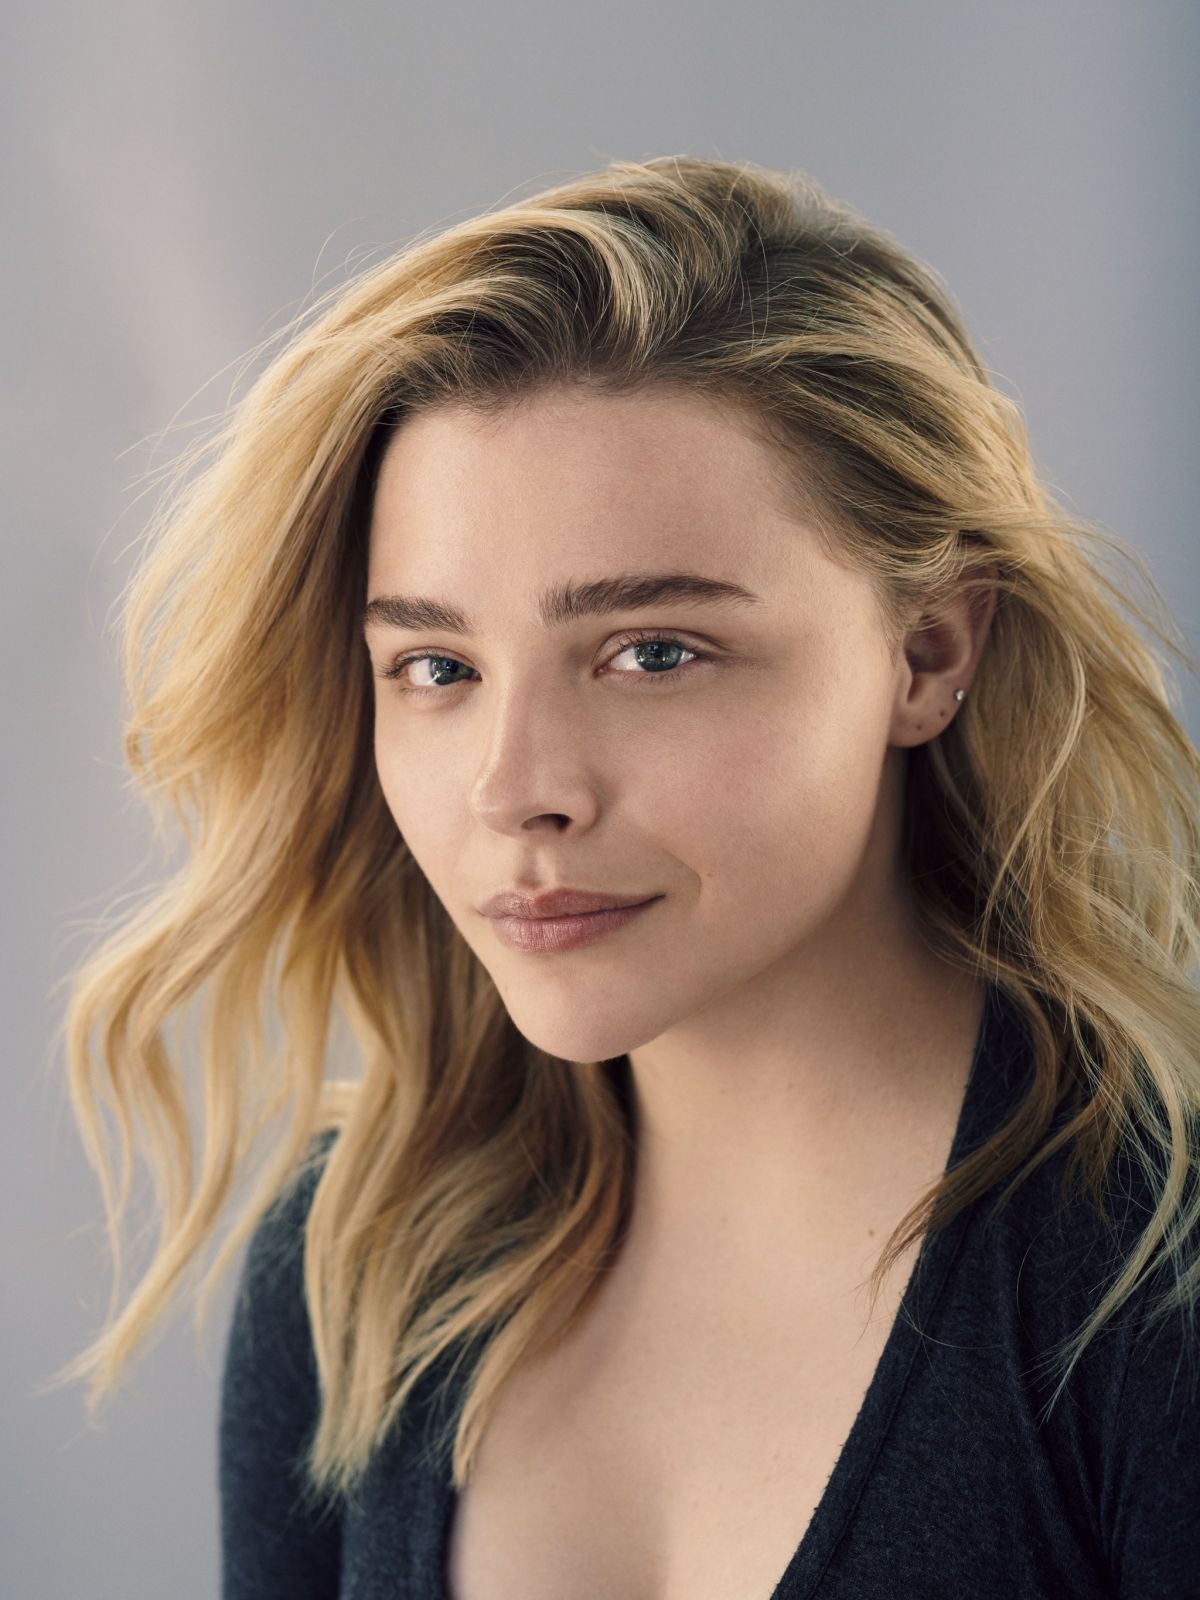 Chloe Grace Moretz Wallpapers HD 2019 for Android - APK 